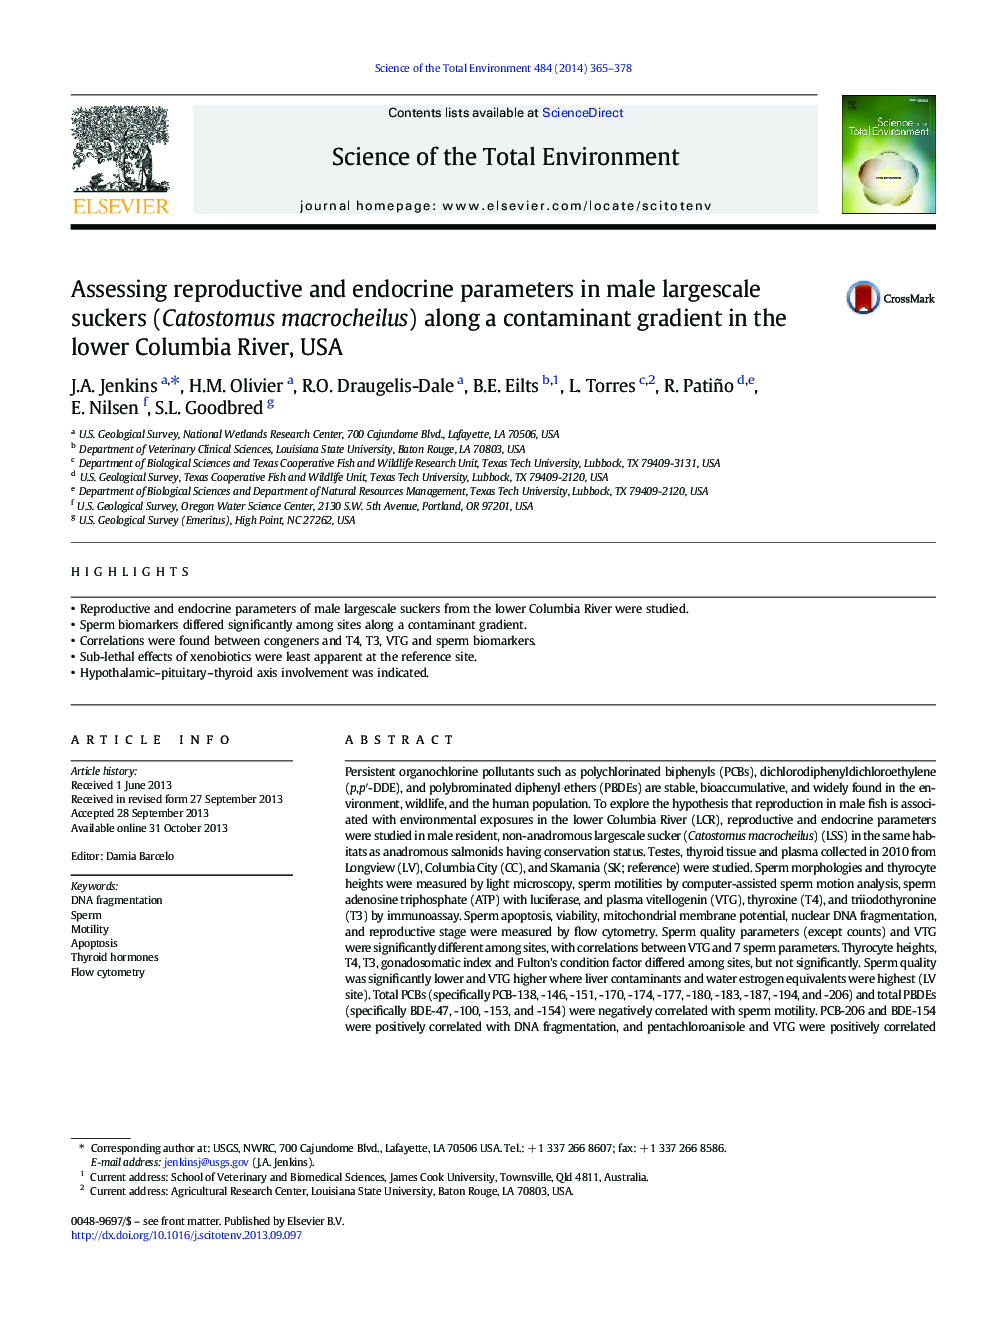 Assessing reproductive and endocrine parameters in male largescale suckers (Catostomus macrocheilus) along a contaminant gradient in the lower Columbia River, USA